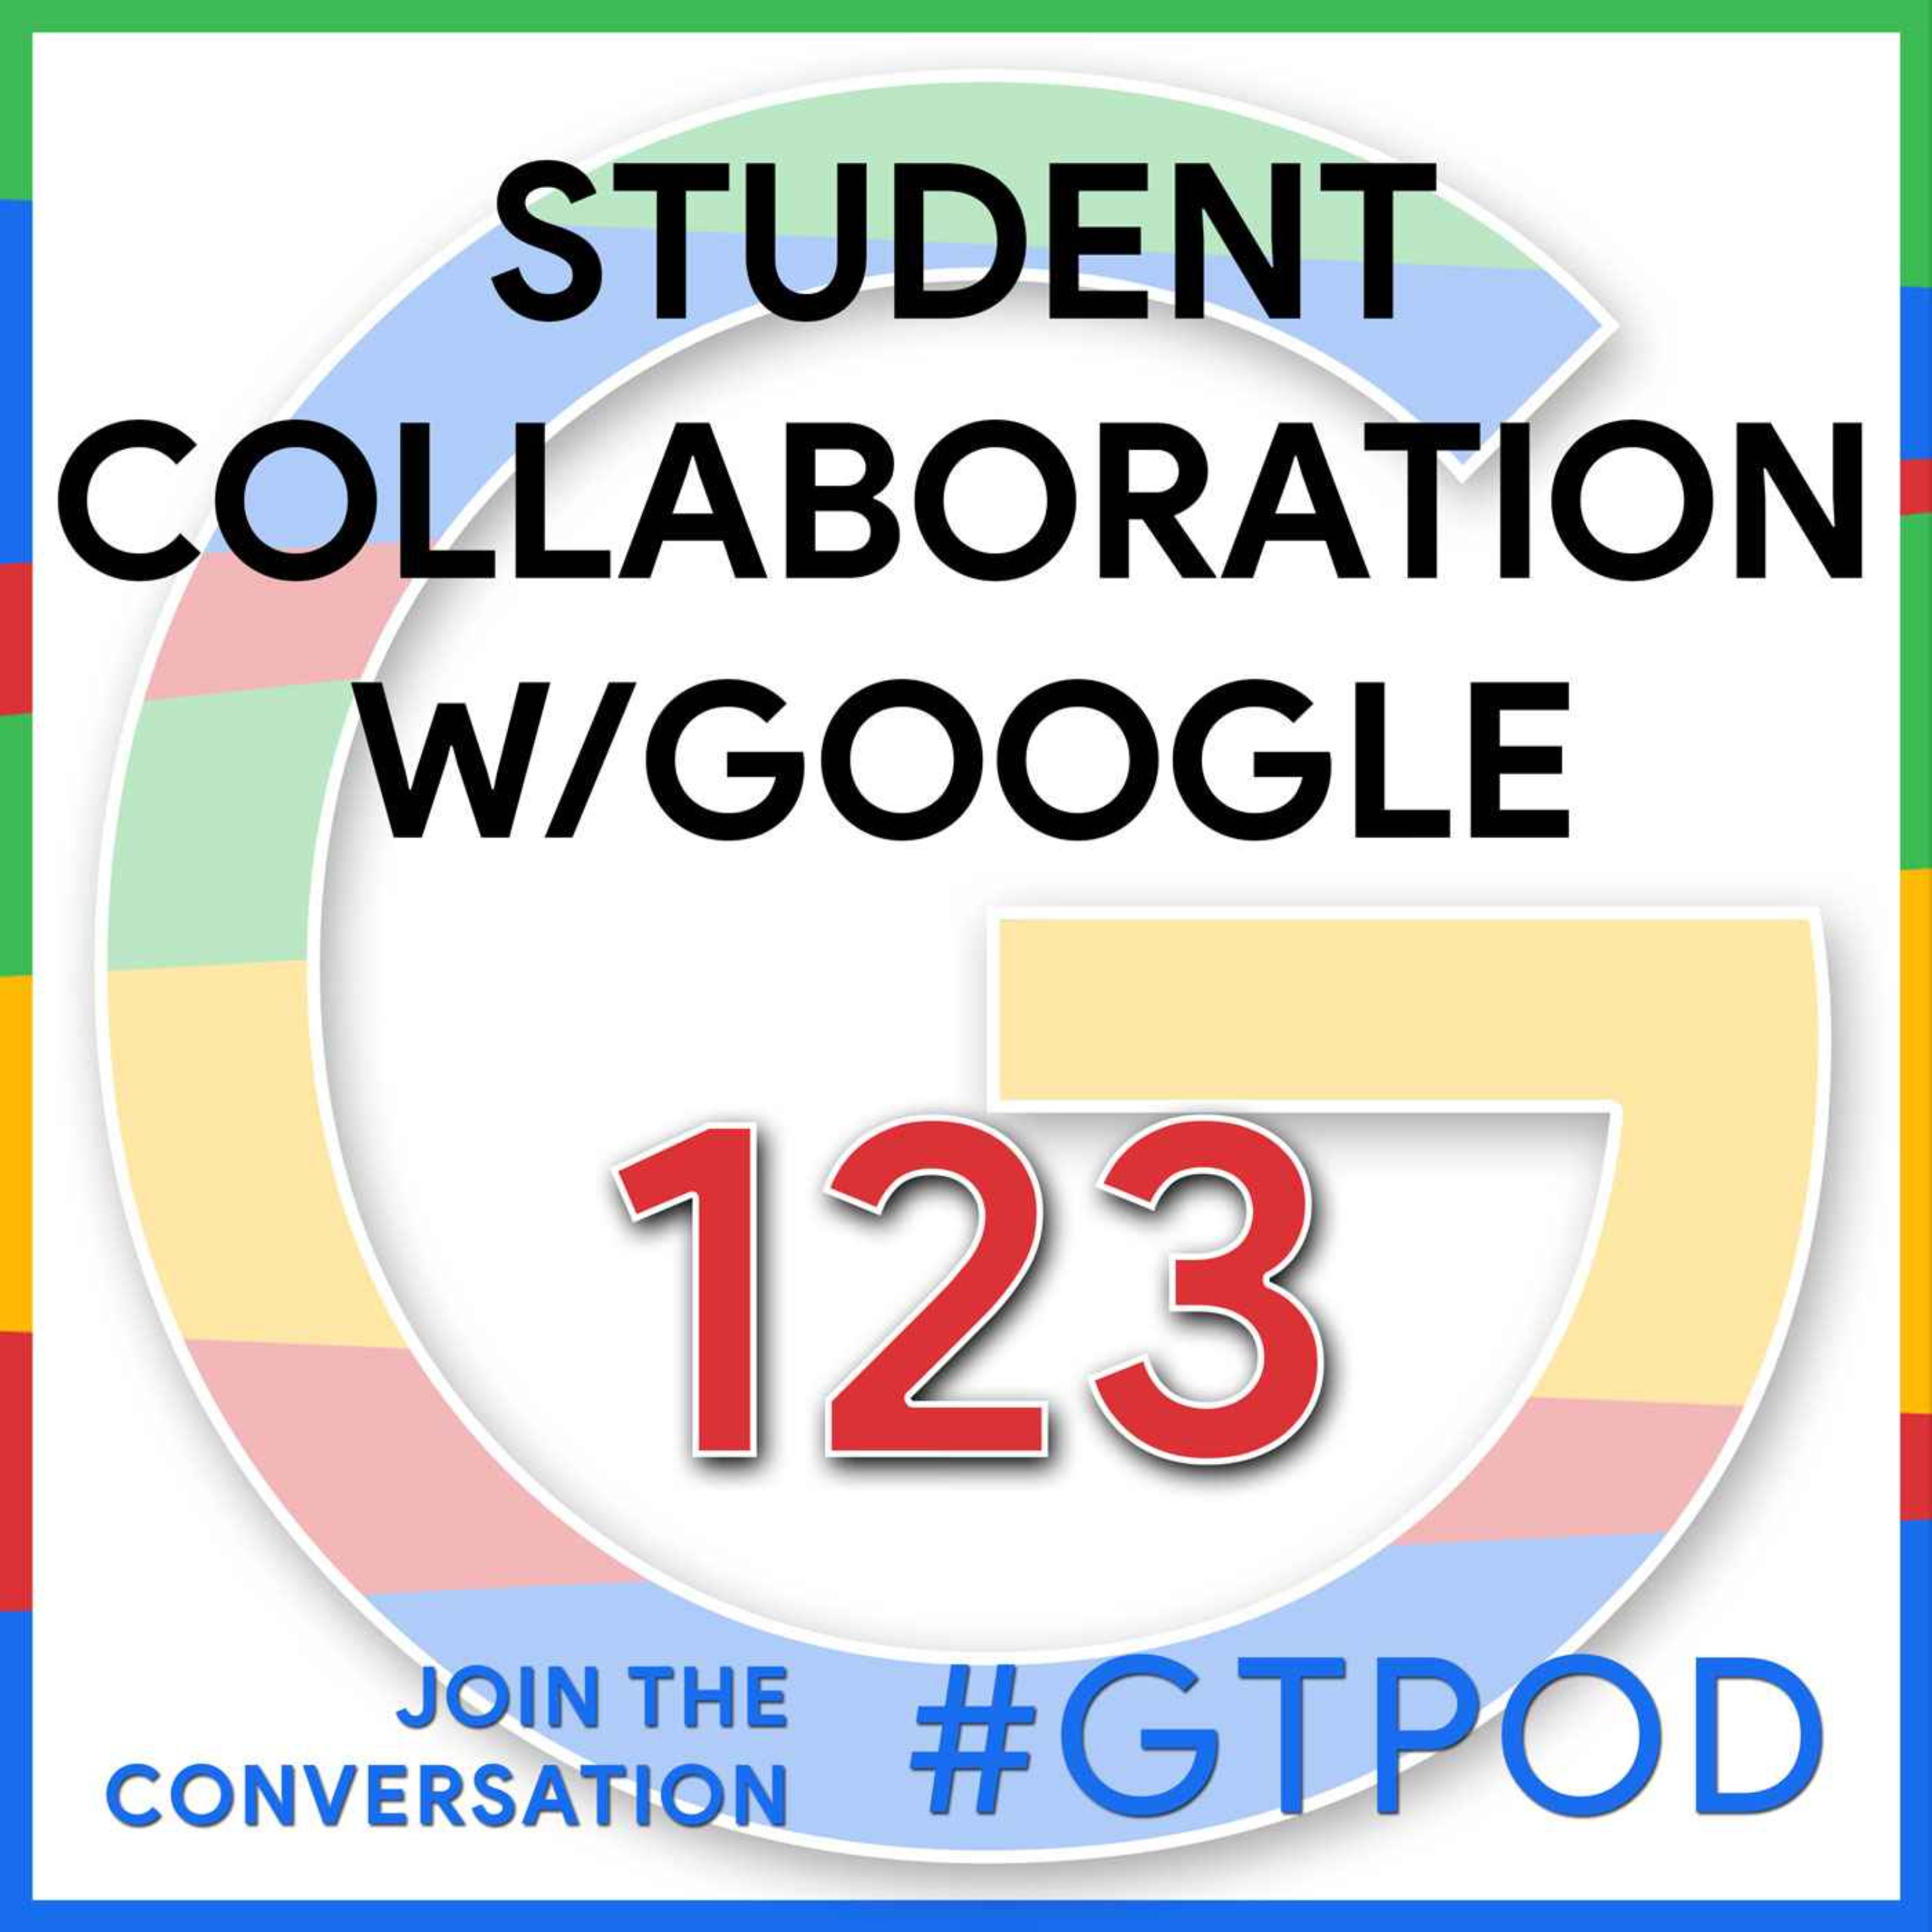 Meaningful Group Work with Google Tools - GTP123